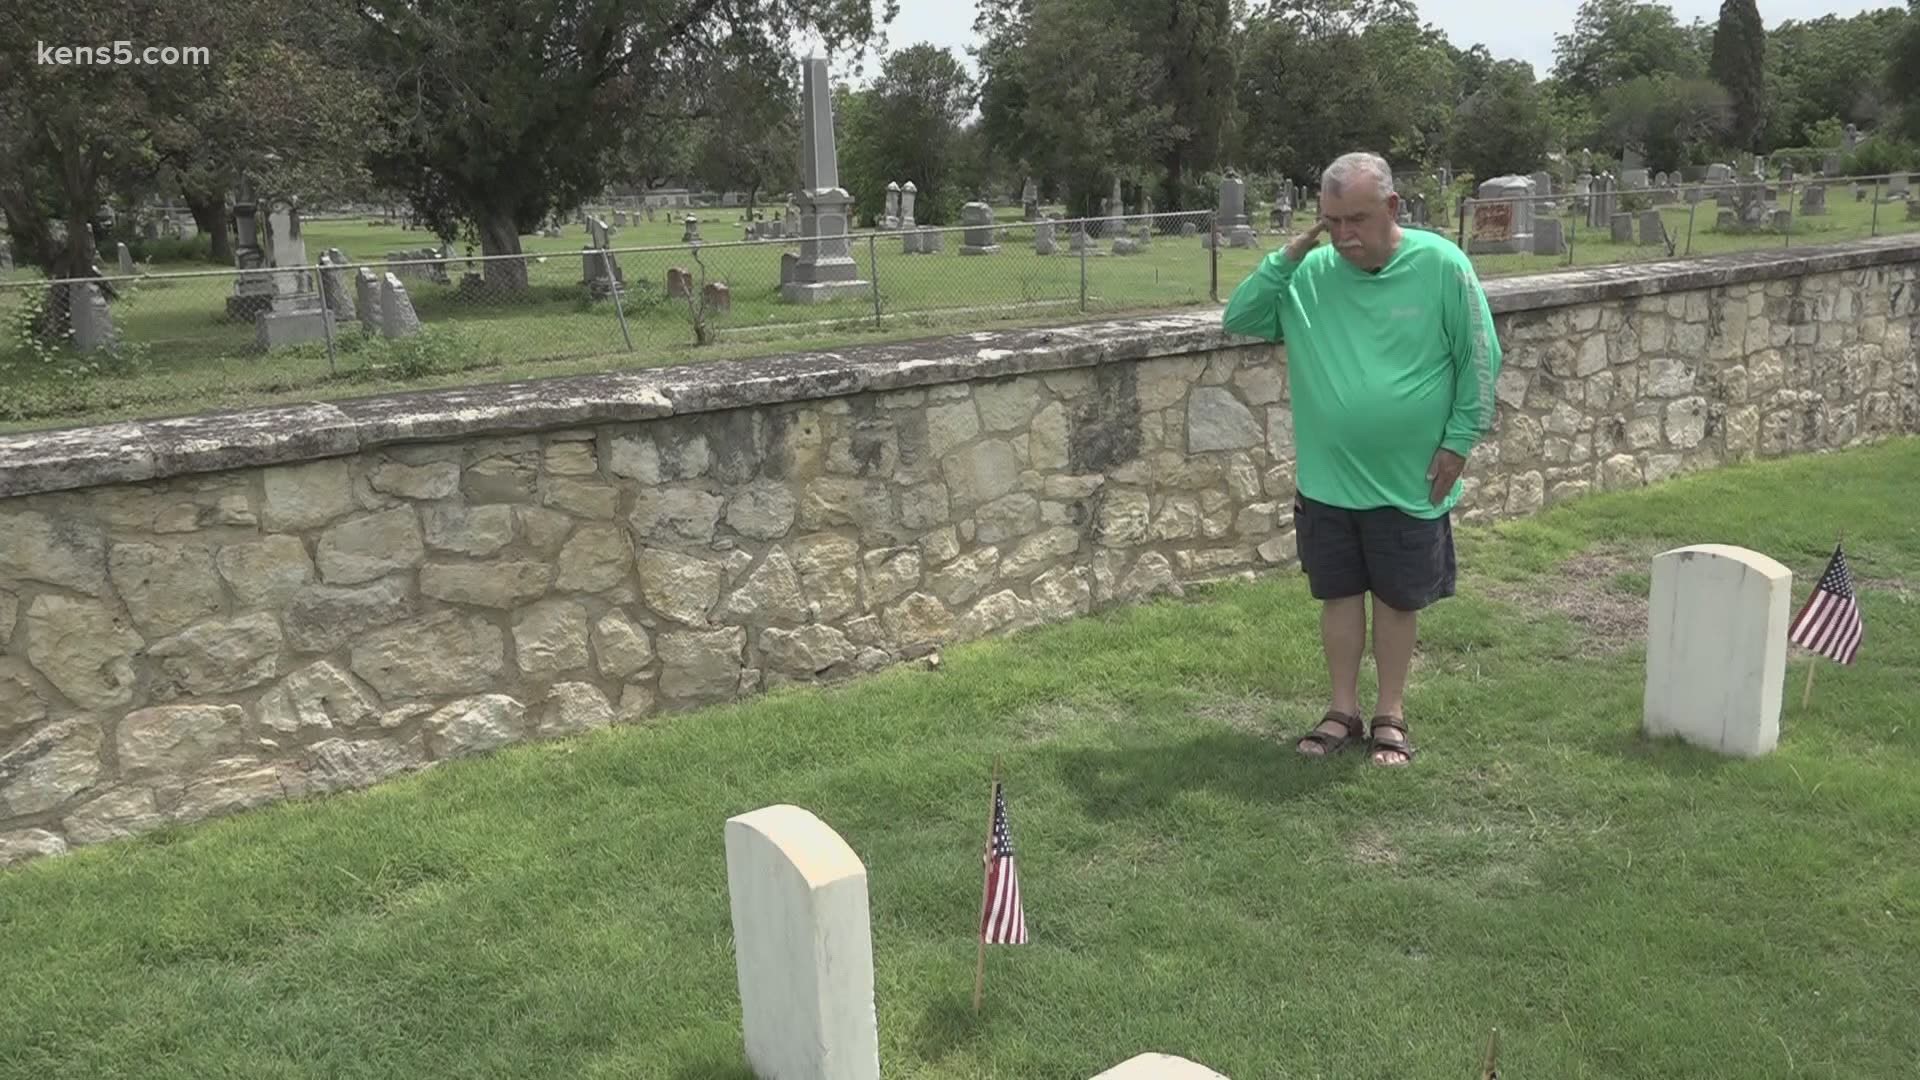 It was only a few years ago that George Leyendecker discovered his grandfather was buried in San Antonio. For him, the journey of discovery continues.